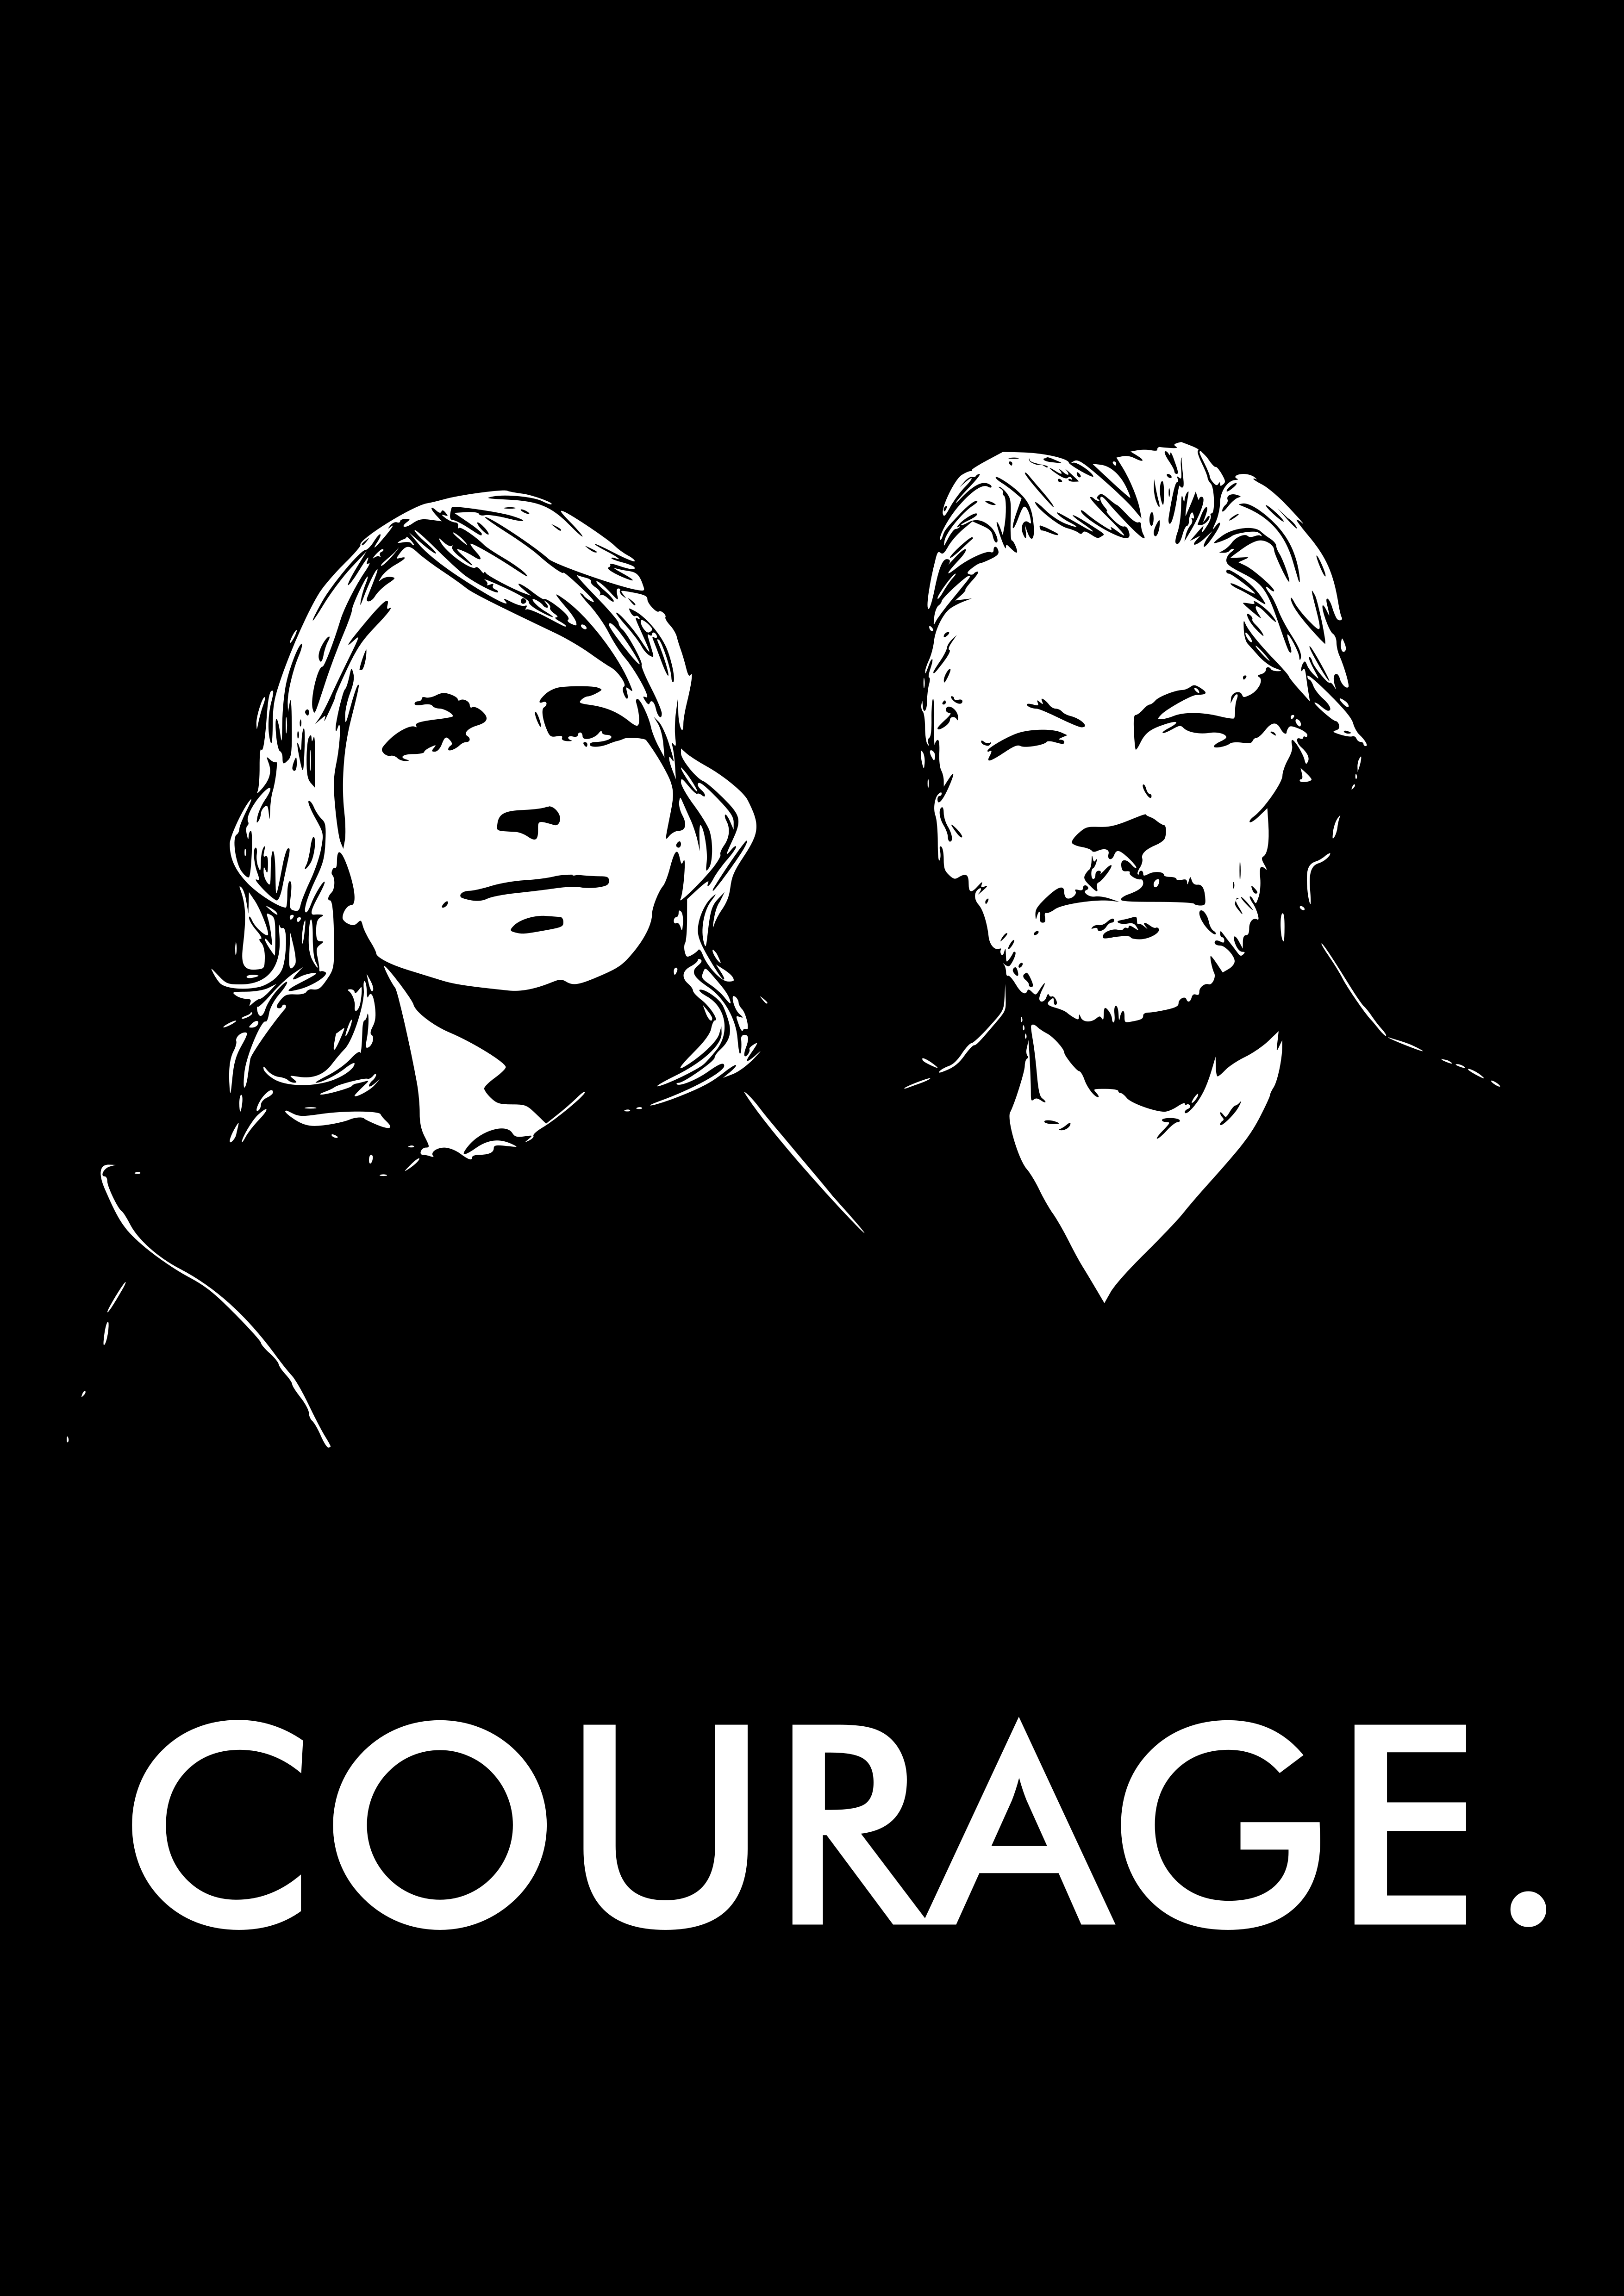 campaign_material:julian_chelsea_courage.png